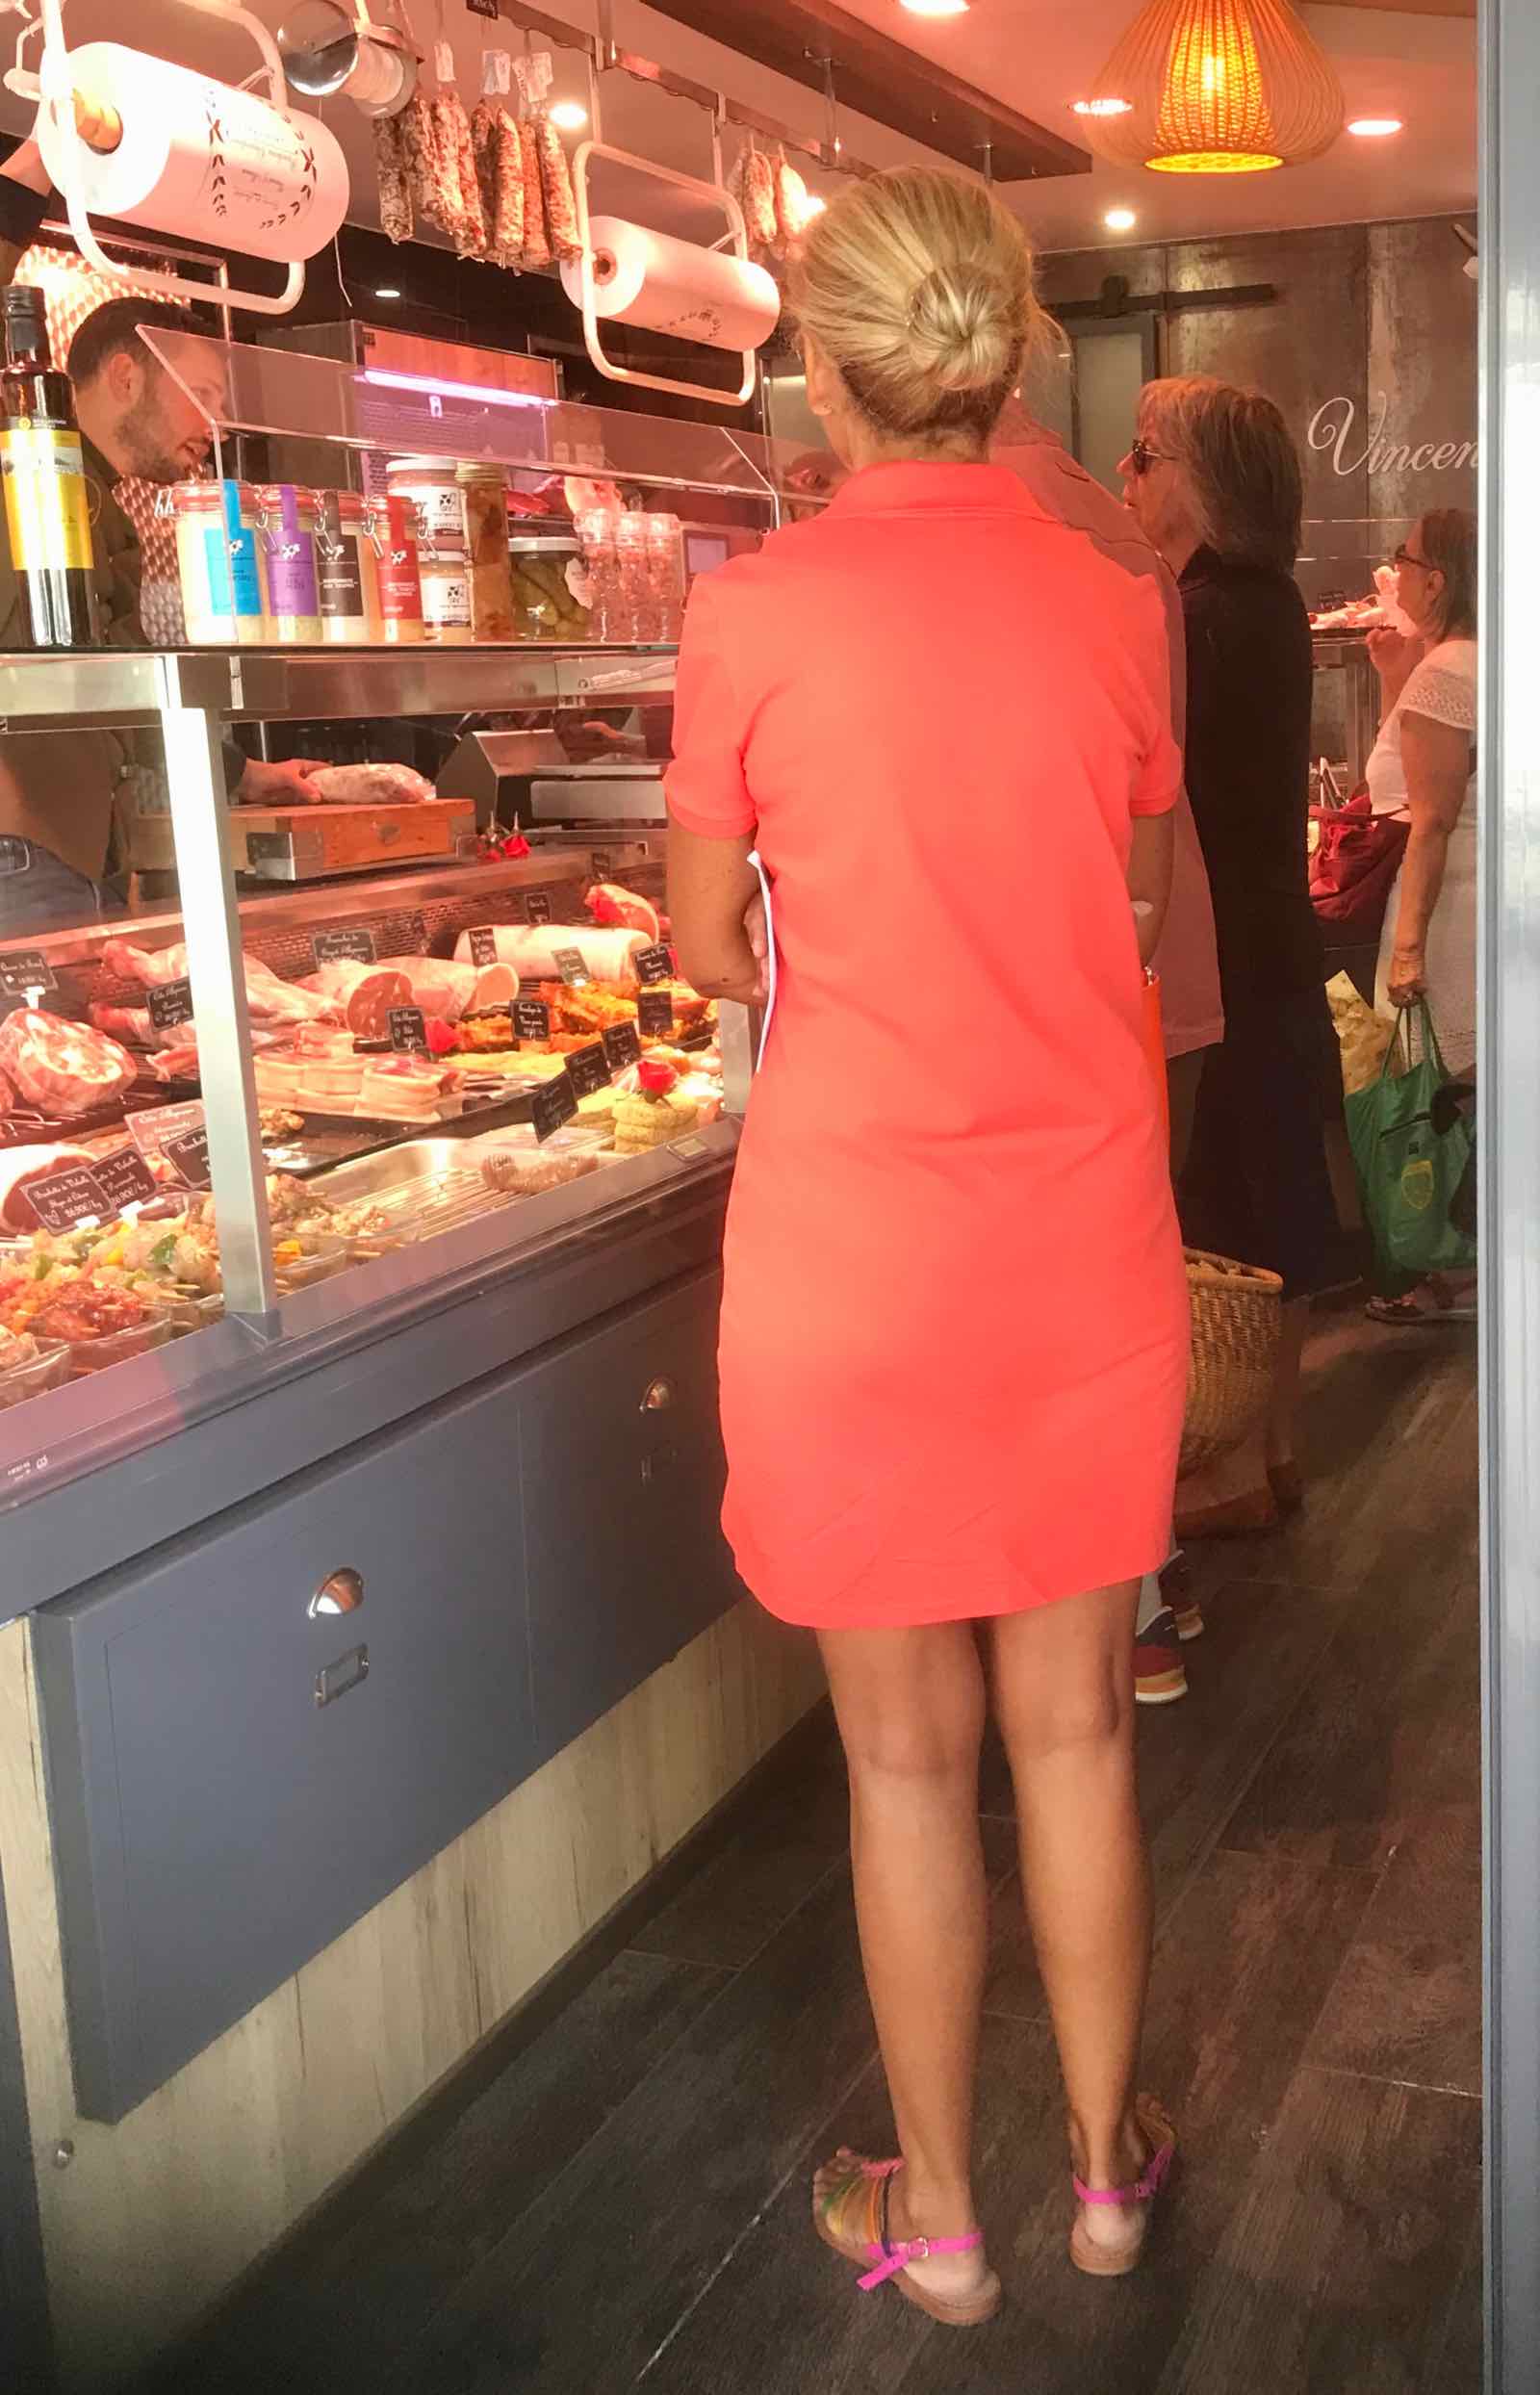 Woman in coral/pink dress and pink sandals